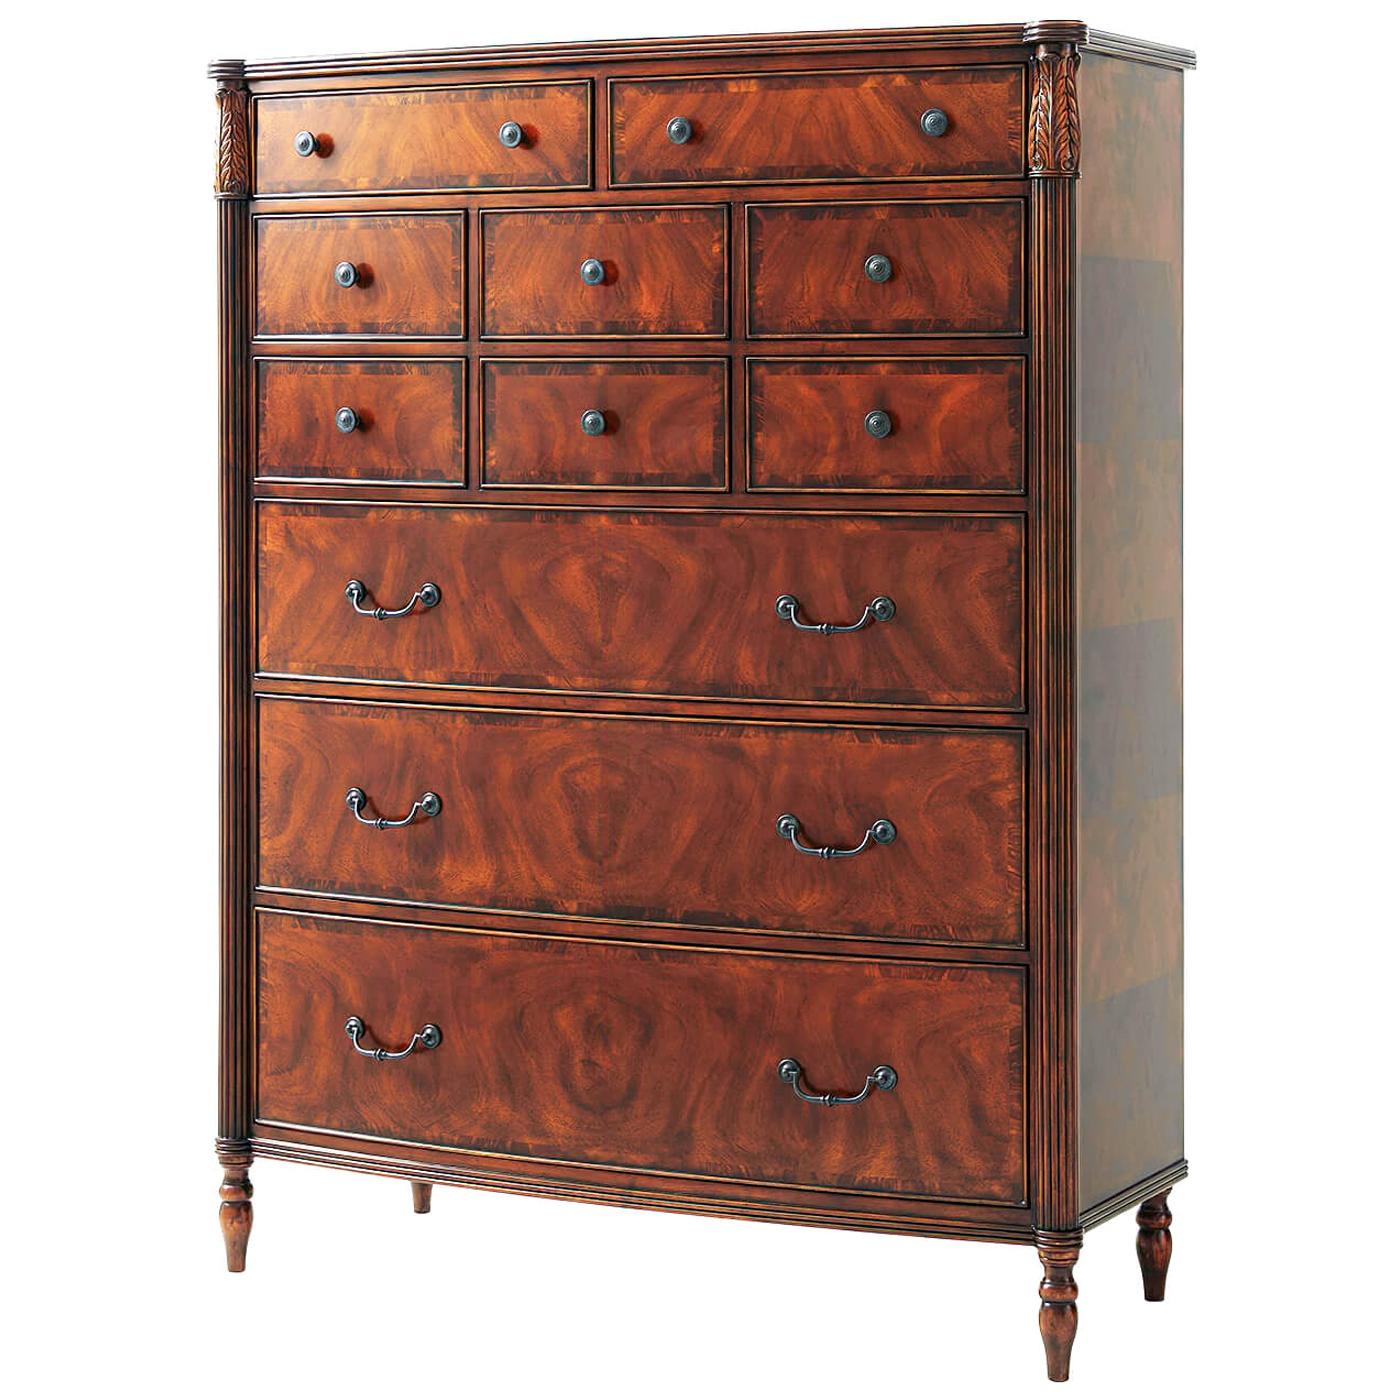 Federal Mahogany Tall Gentleman's Chest